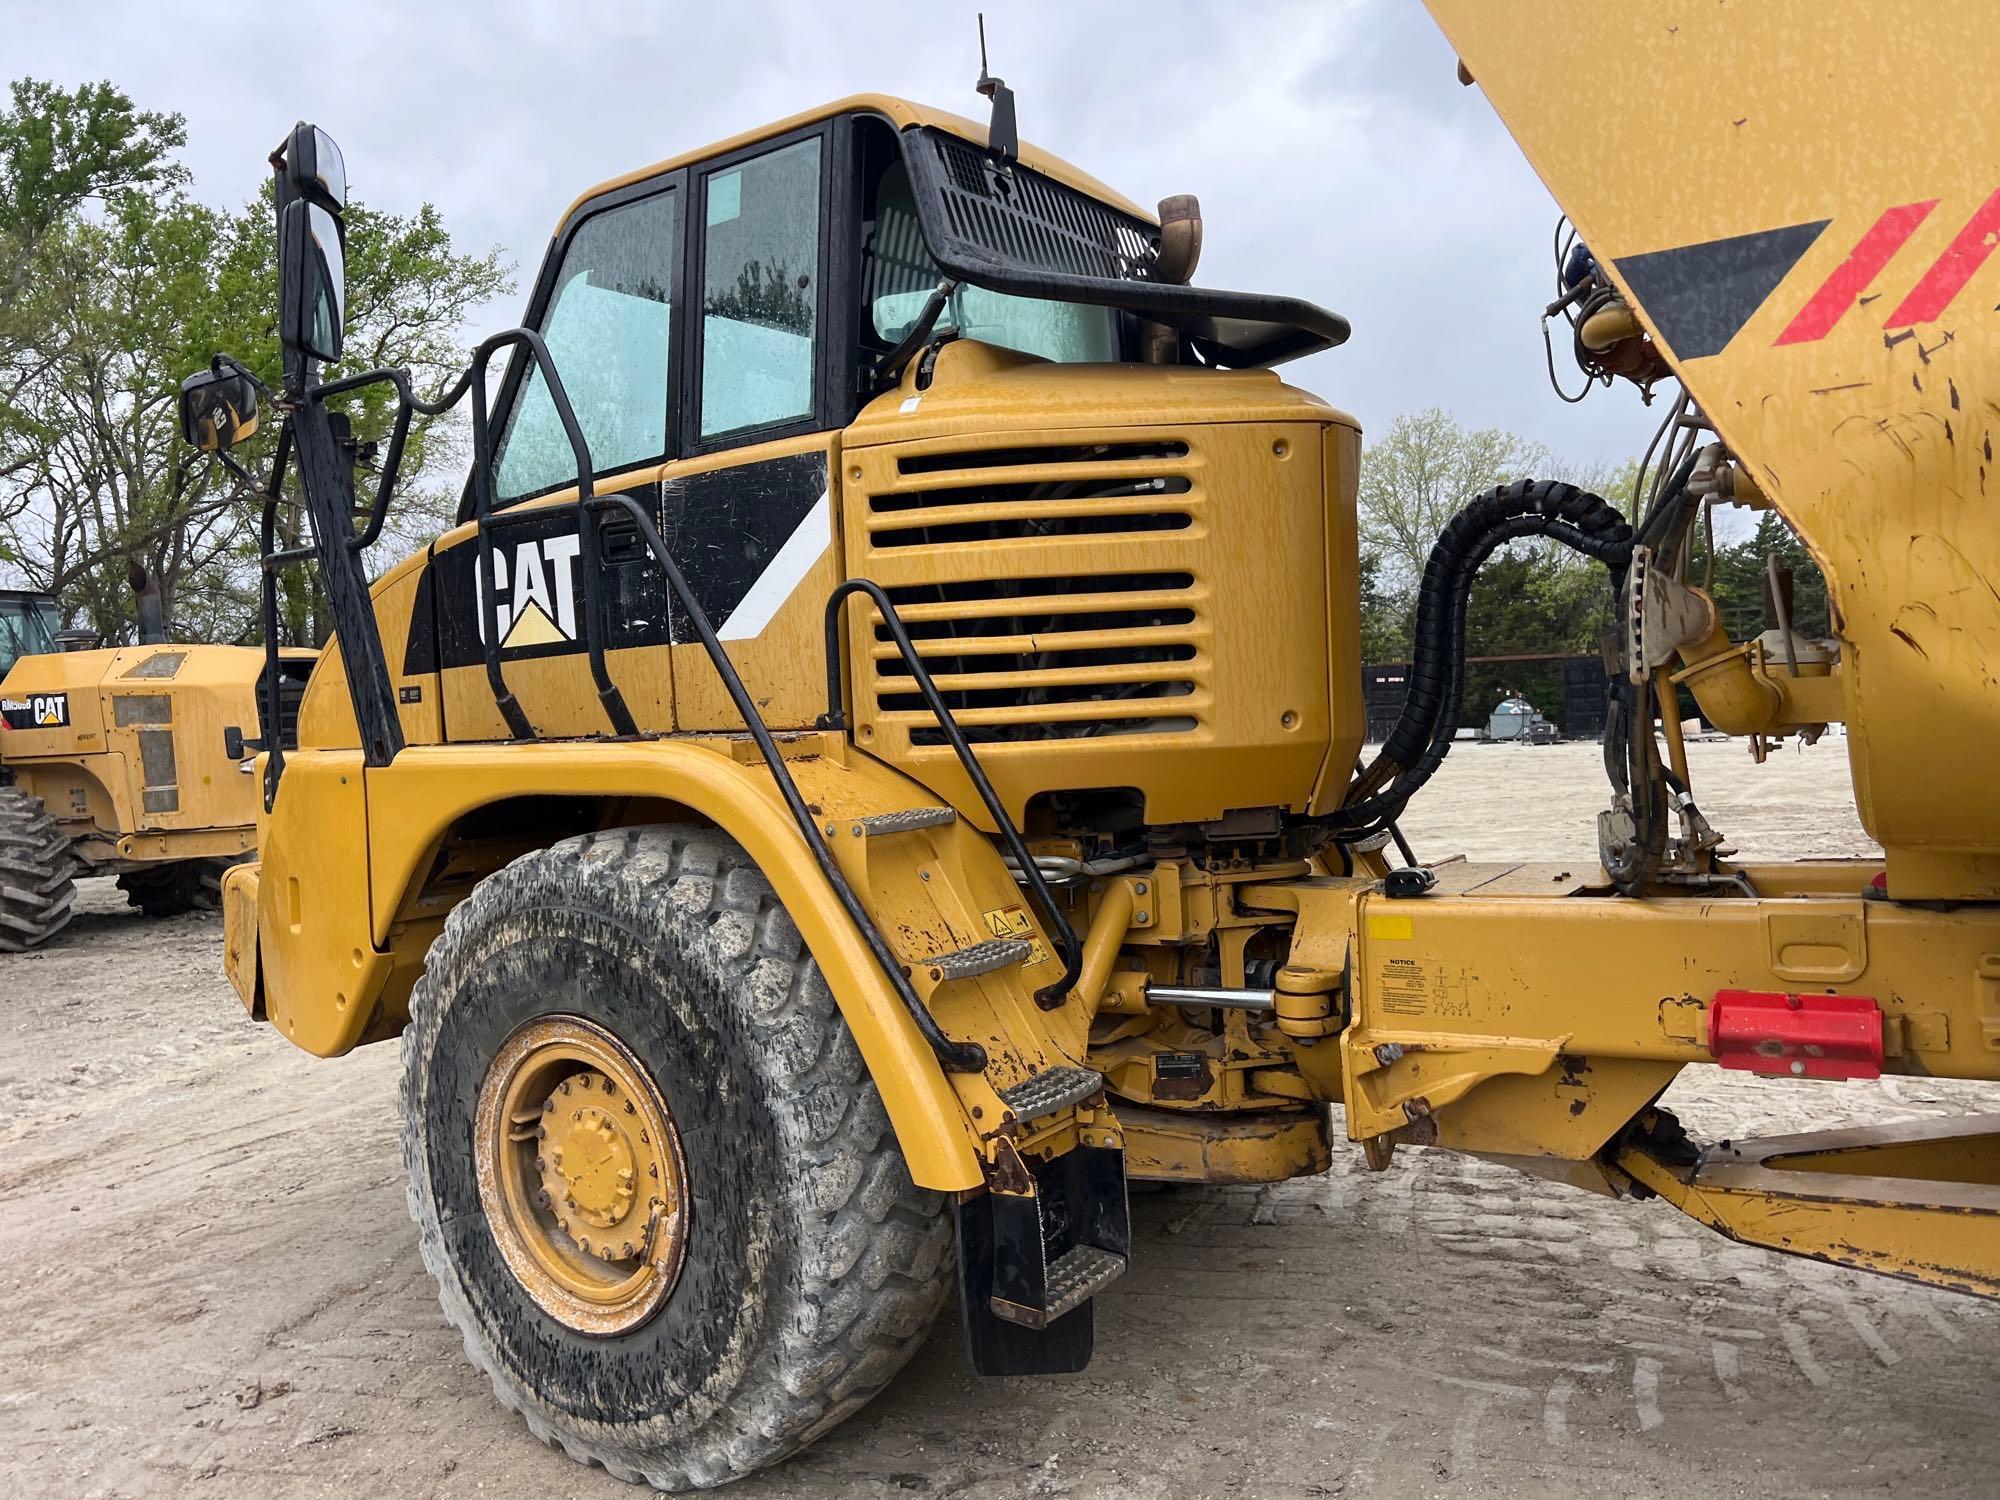 2012 CAT 725 WATER TRUCK SN:CAT00725KB1L02645...6x6, powered by Cat C11 diesel engine, equipped with